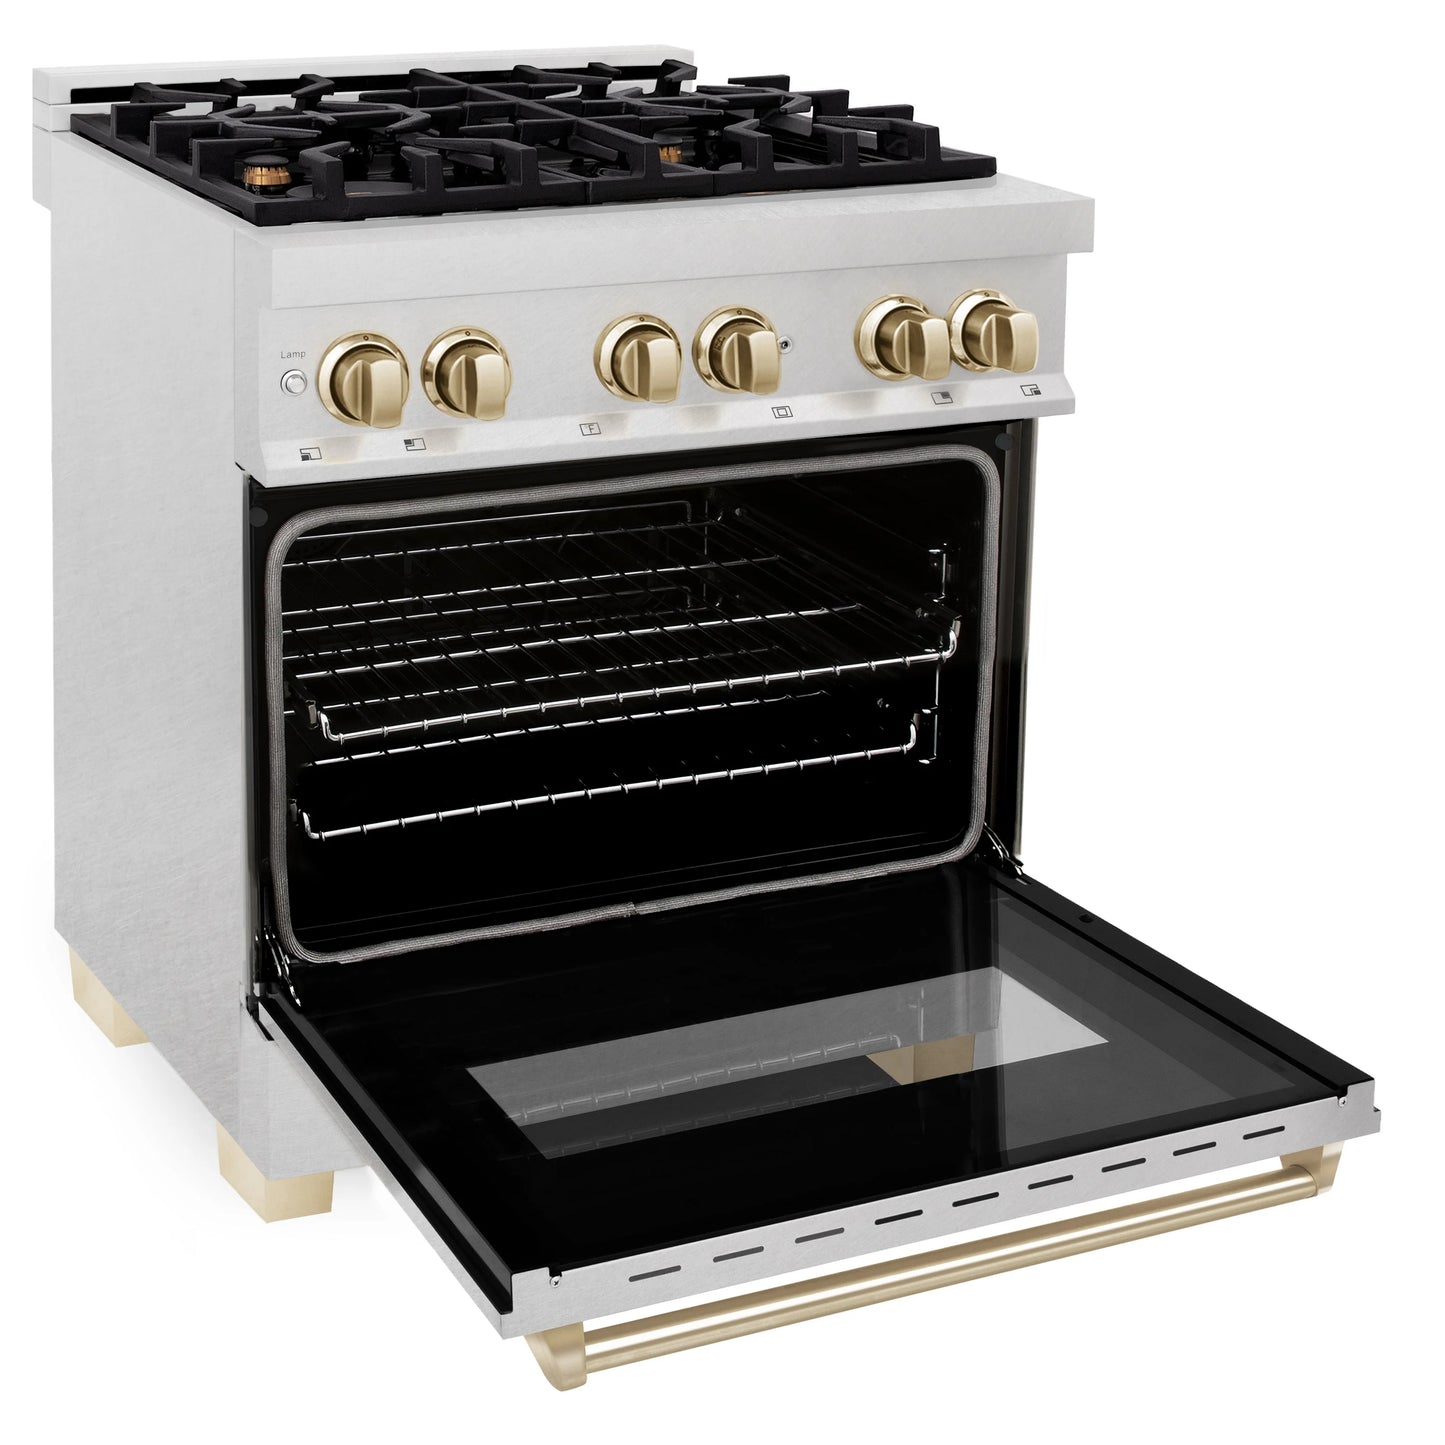 ZLINE Autograph Edition 30 in. Dual Fuel Range in DuraSnow Steel with Gold Accents (RASZ-SN-30-G)